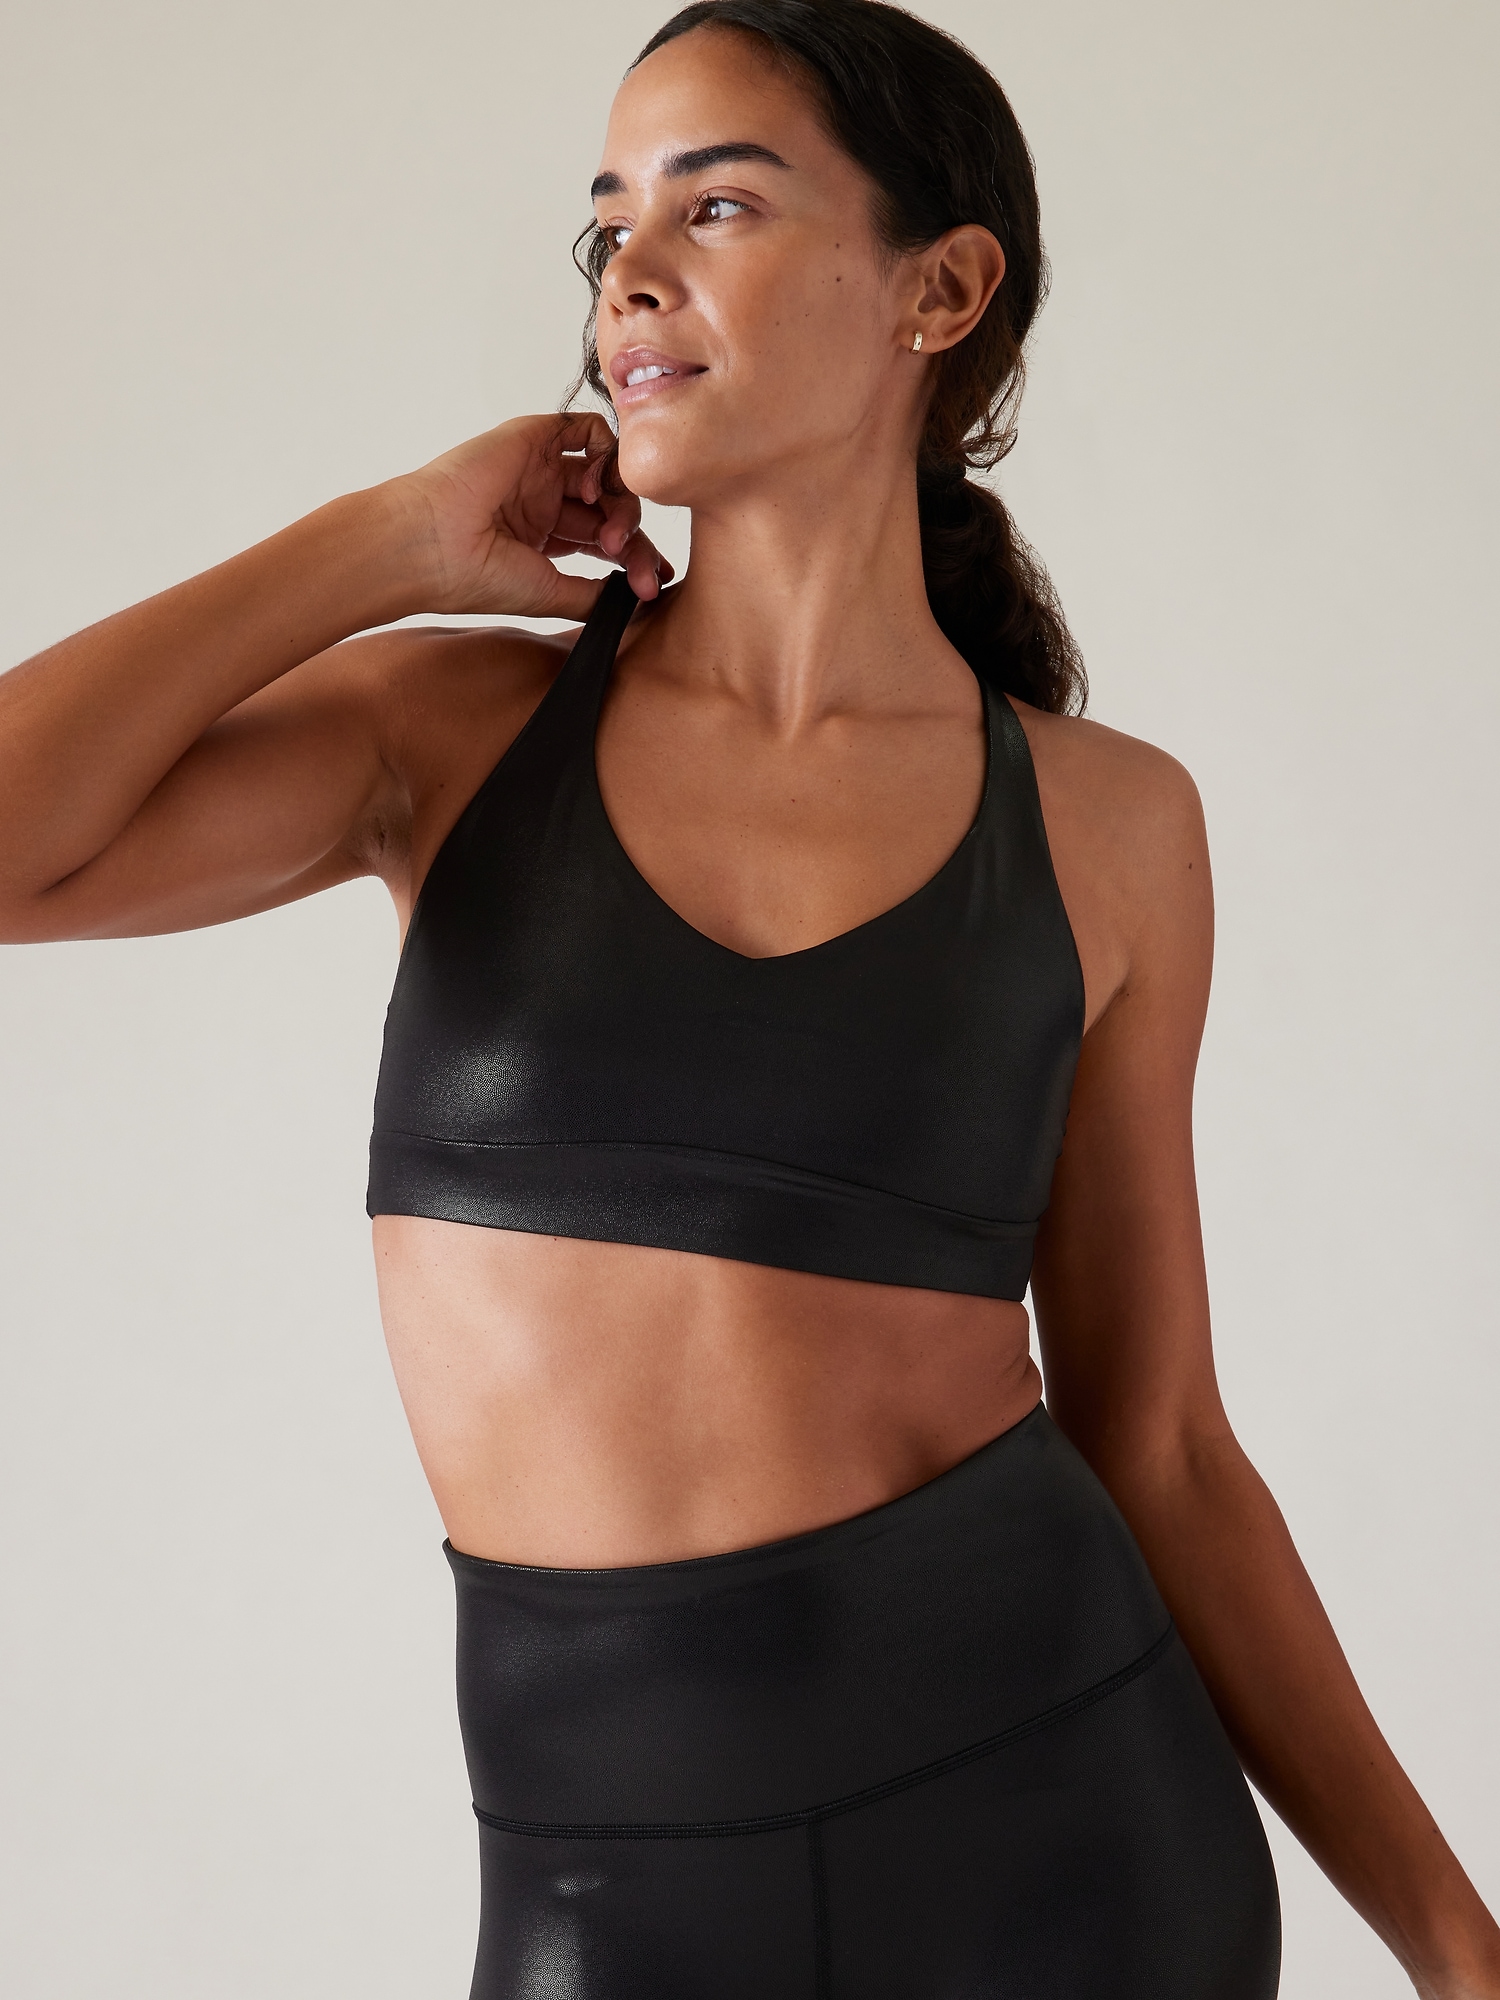 This Comfortable $19 Sports Bra Is a Lululemon Dupe